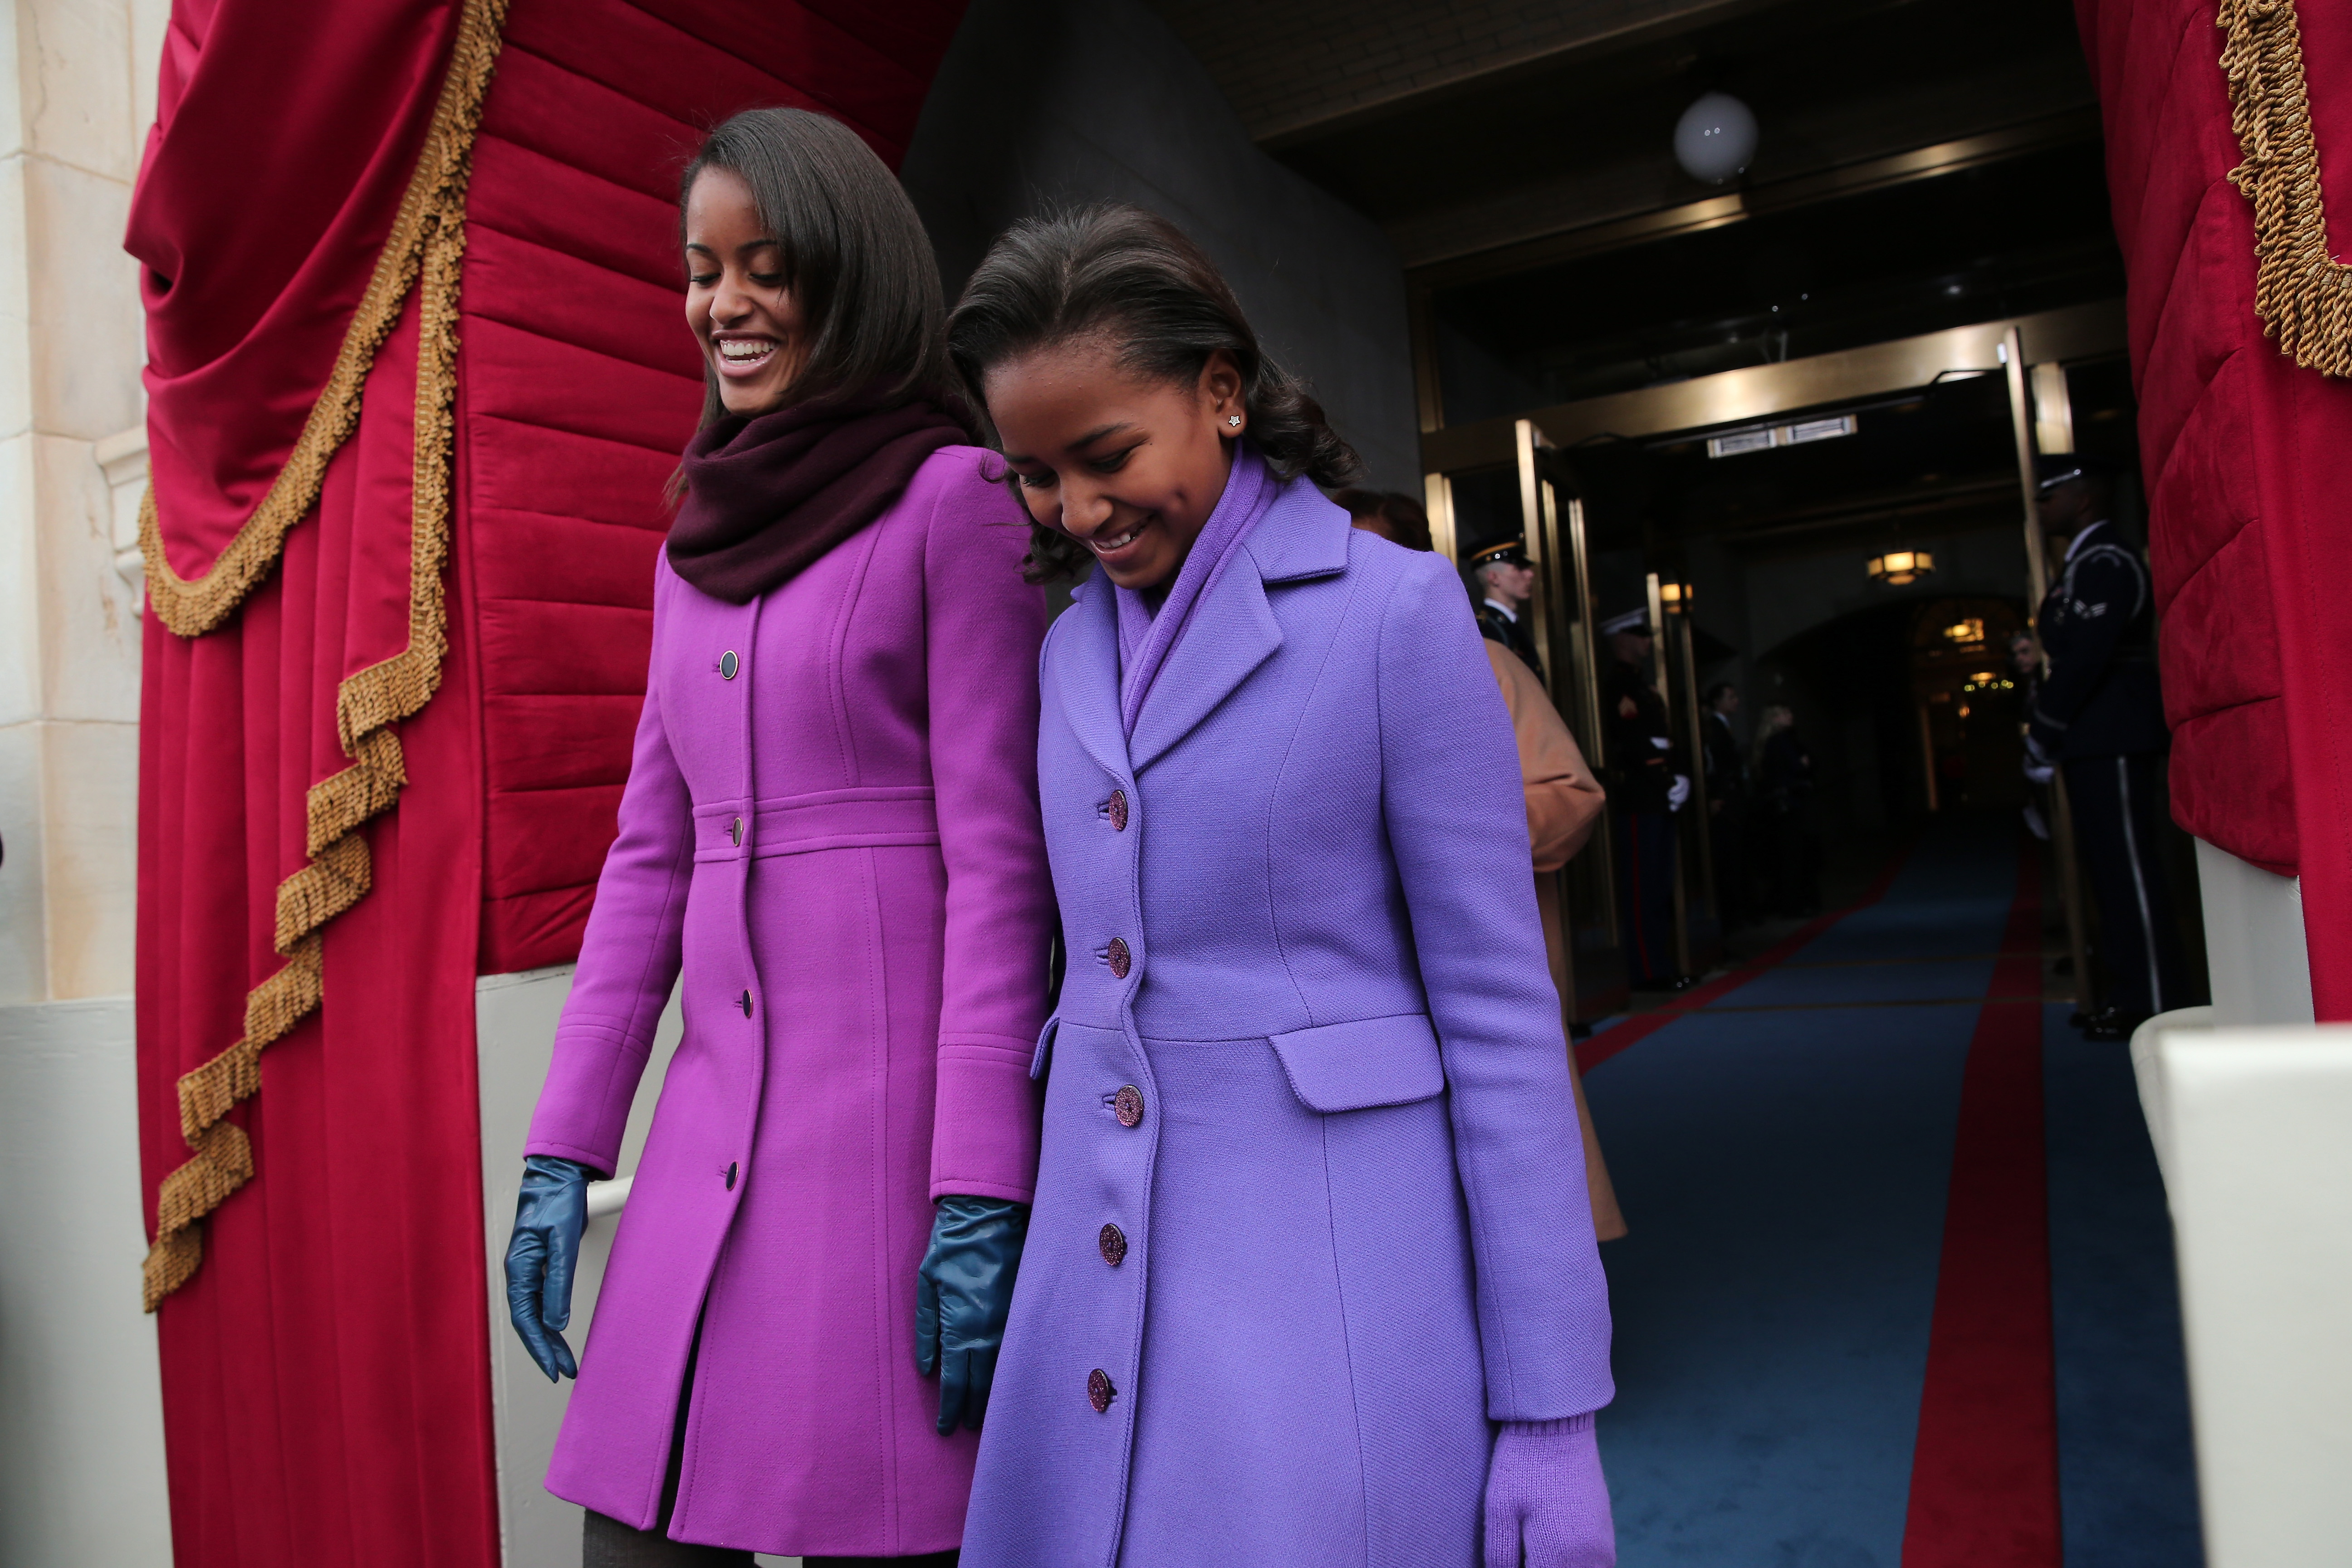 Malia and Sasha arrive during the presidential inauguration on the West Front of the U.S. Capitol in Washington, DC, on Jan. 21, 2013.